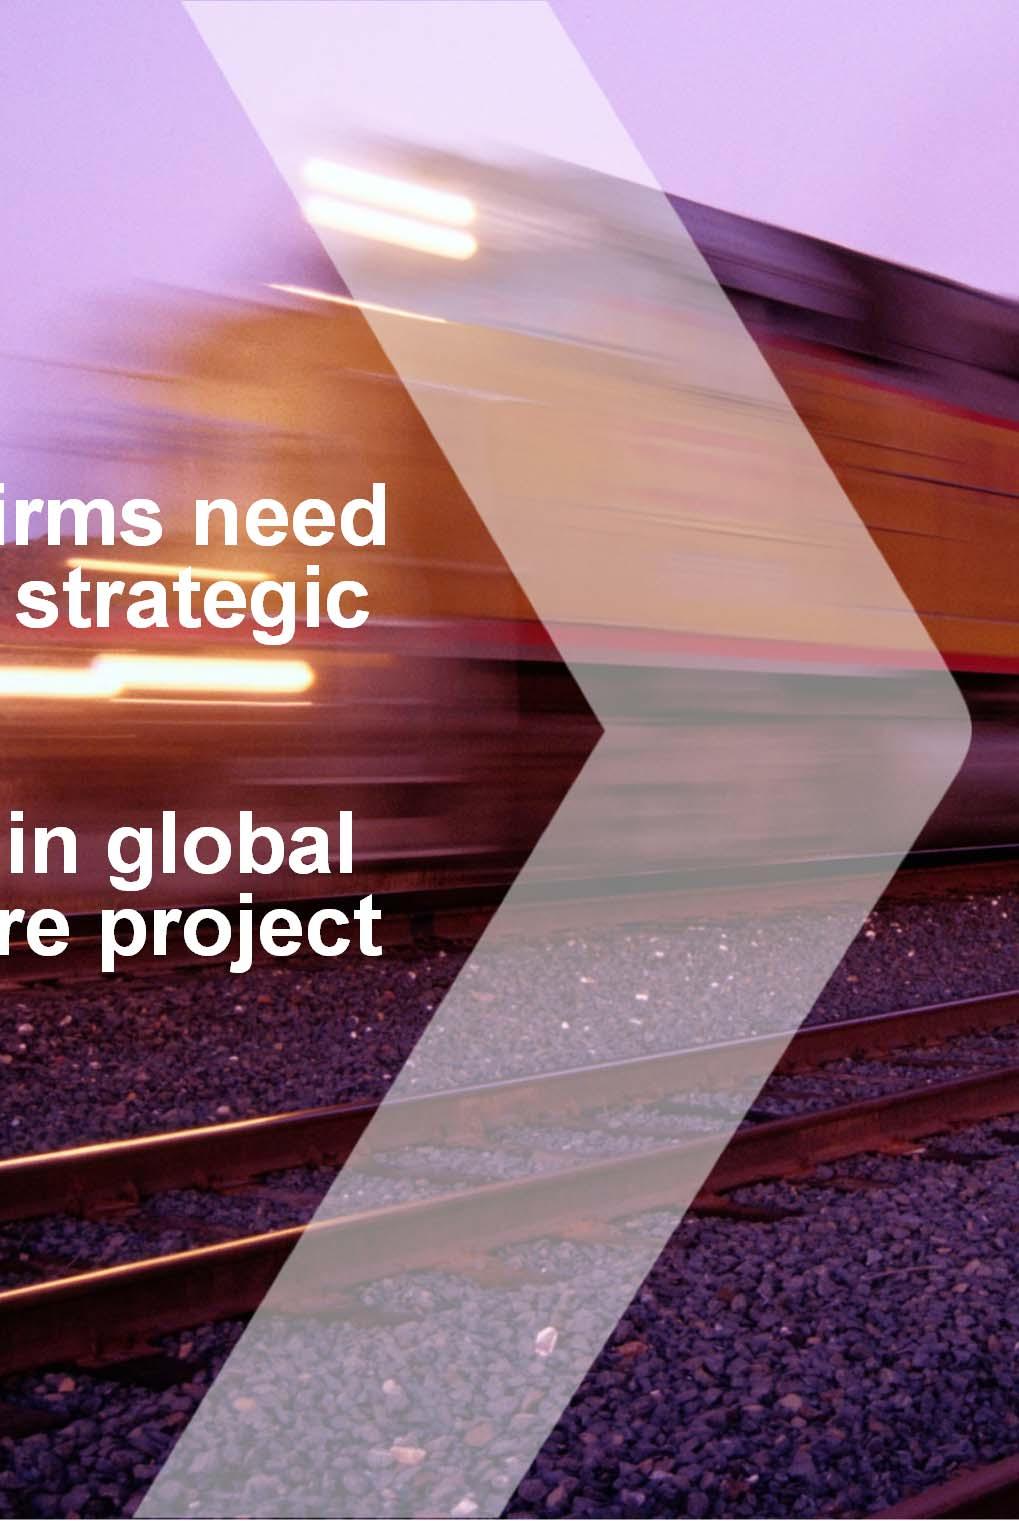 To support this, Austrade will: Promote as Australia as a leading provider of transport systems solutions stralian firms need establish strategic iances d embed mselves in global rastructure project